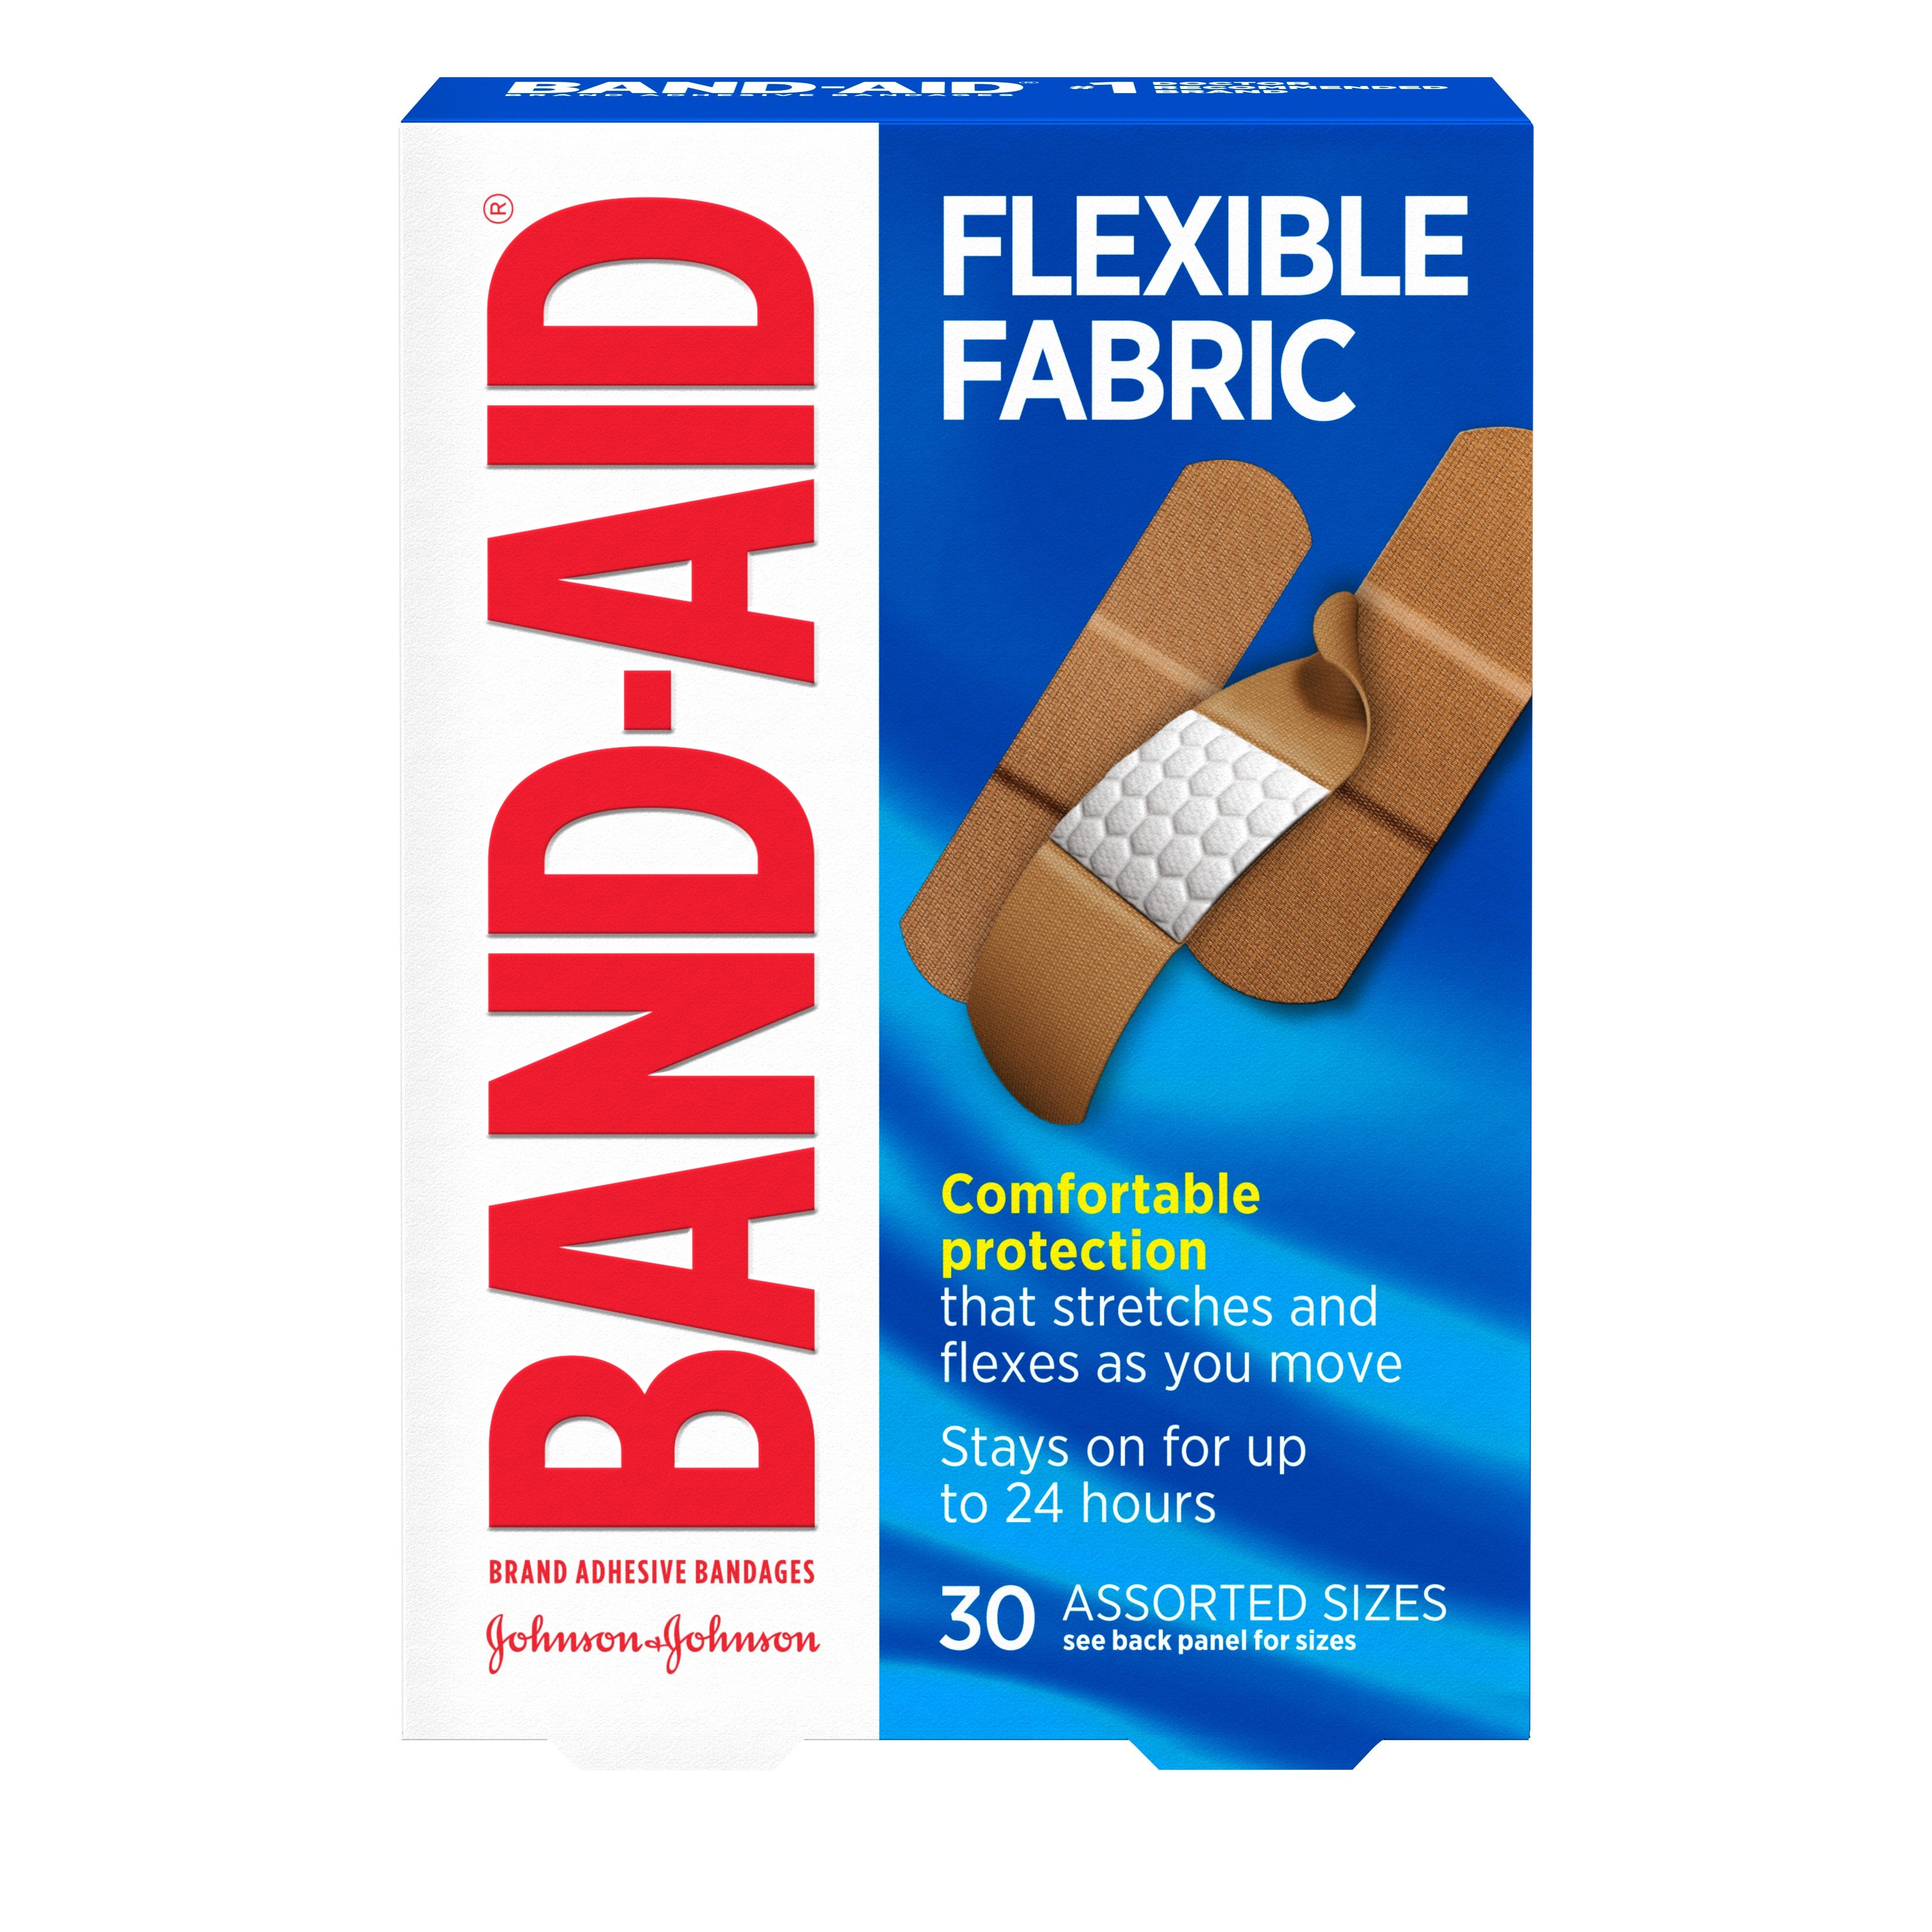 Heavy Woven Extra-Large Adhesive Flexible Fabric 2x3 Strips - Box of 25